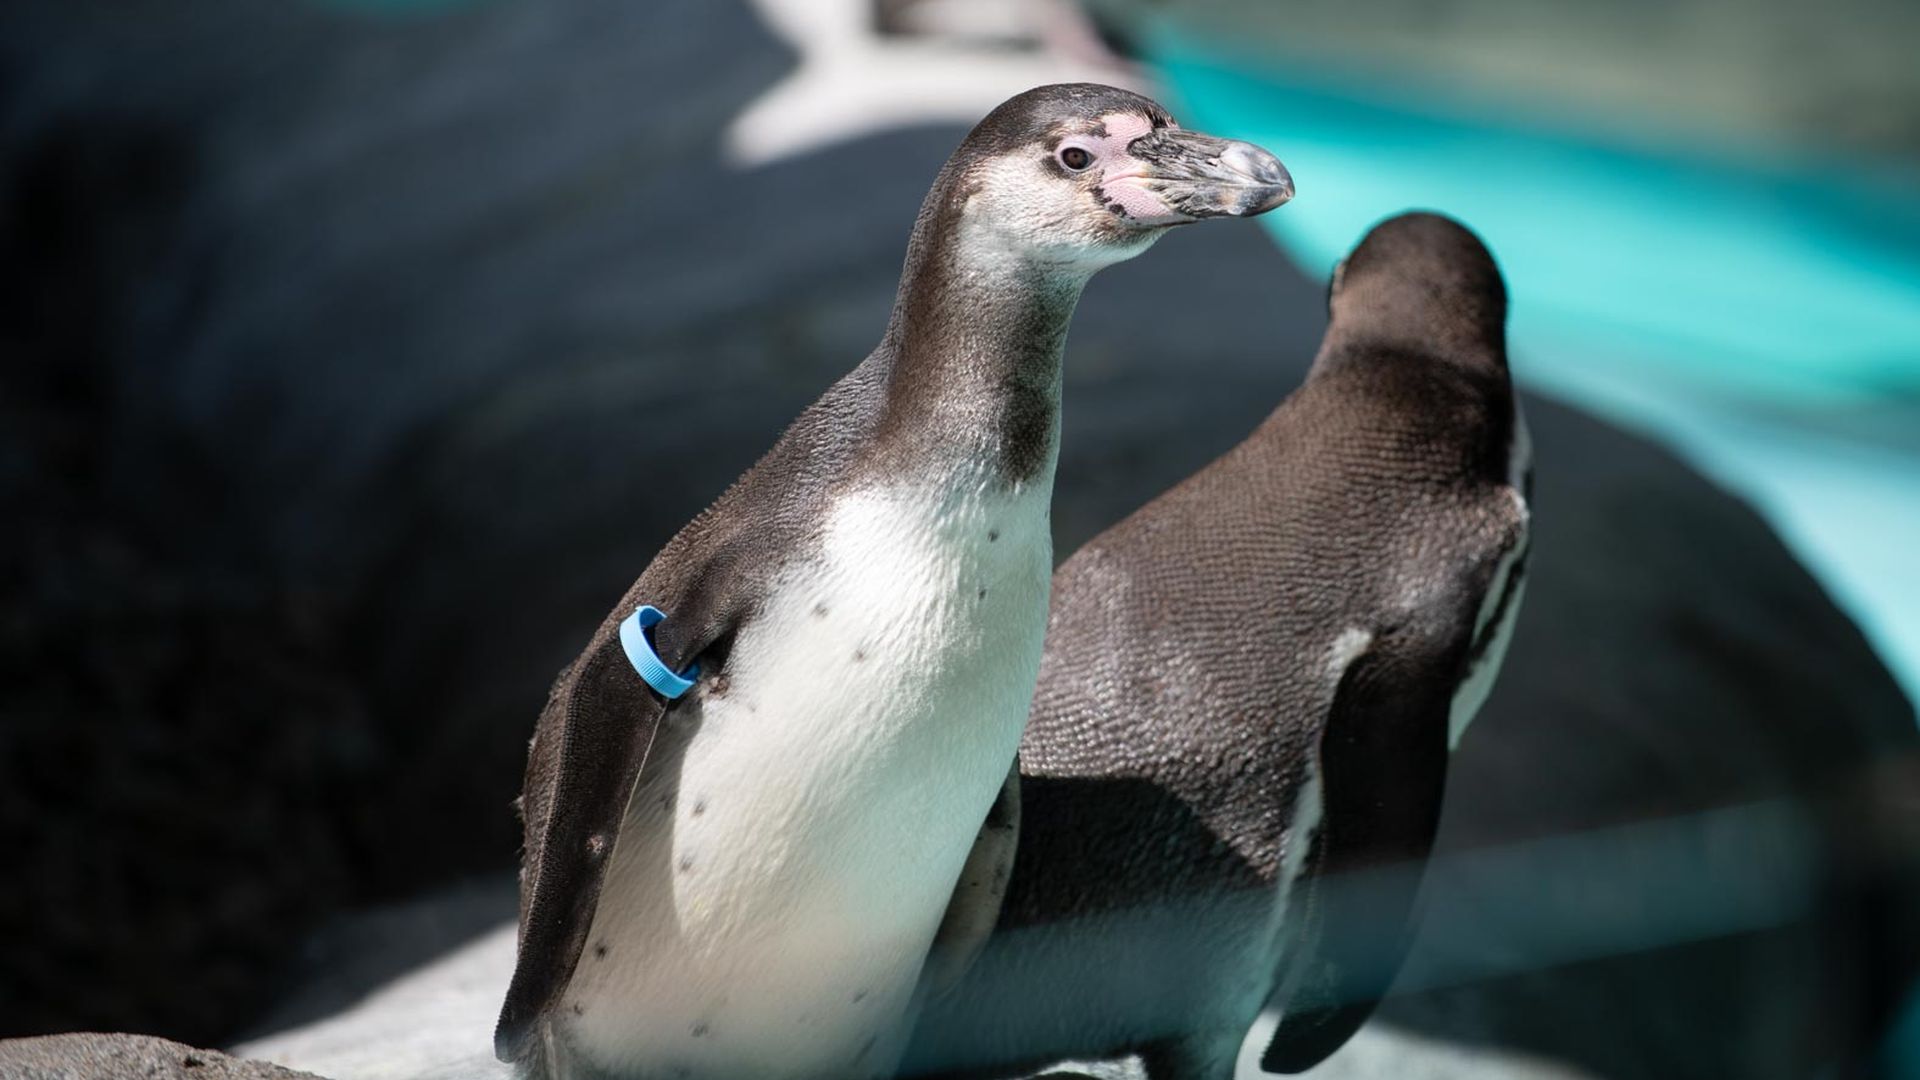 A Humboldt penguin with a blue arm band